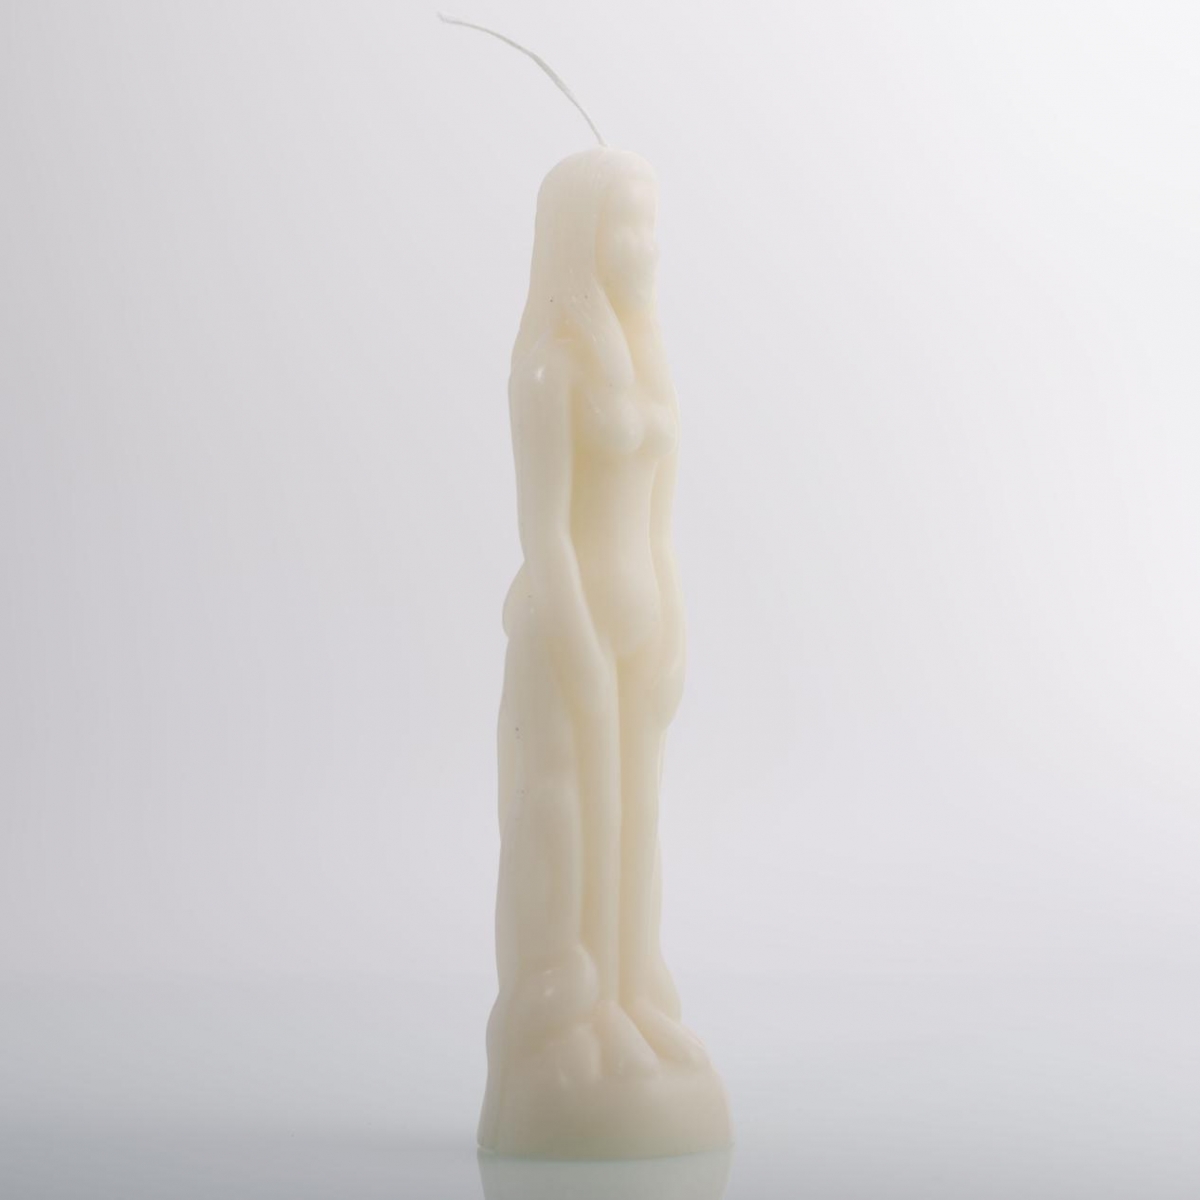 Body Candles：Female Body ,Female Figure , Sculpture Torso ,Beeswax Candles ,China Factory ,Best Price-HOWCANDLE-Candles,Scented Candles,Aromatherapy Candles,Soy Candles,Vegan Candles,Jar Candles,Pillar Candles,Candle Gift Sets,Essential Oils,Reed Diffuser,Candle Holder,